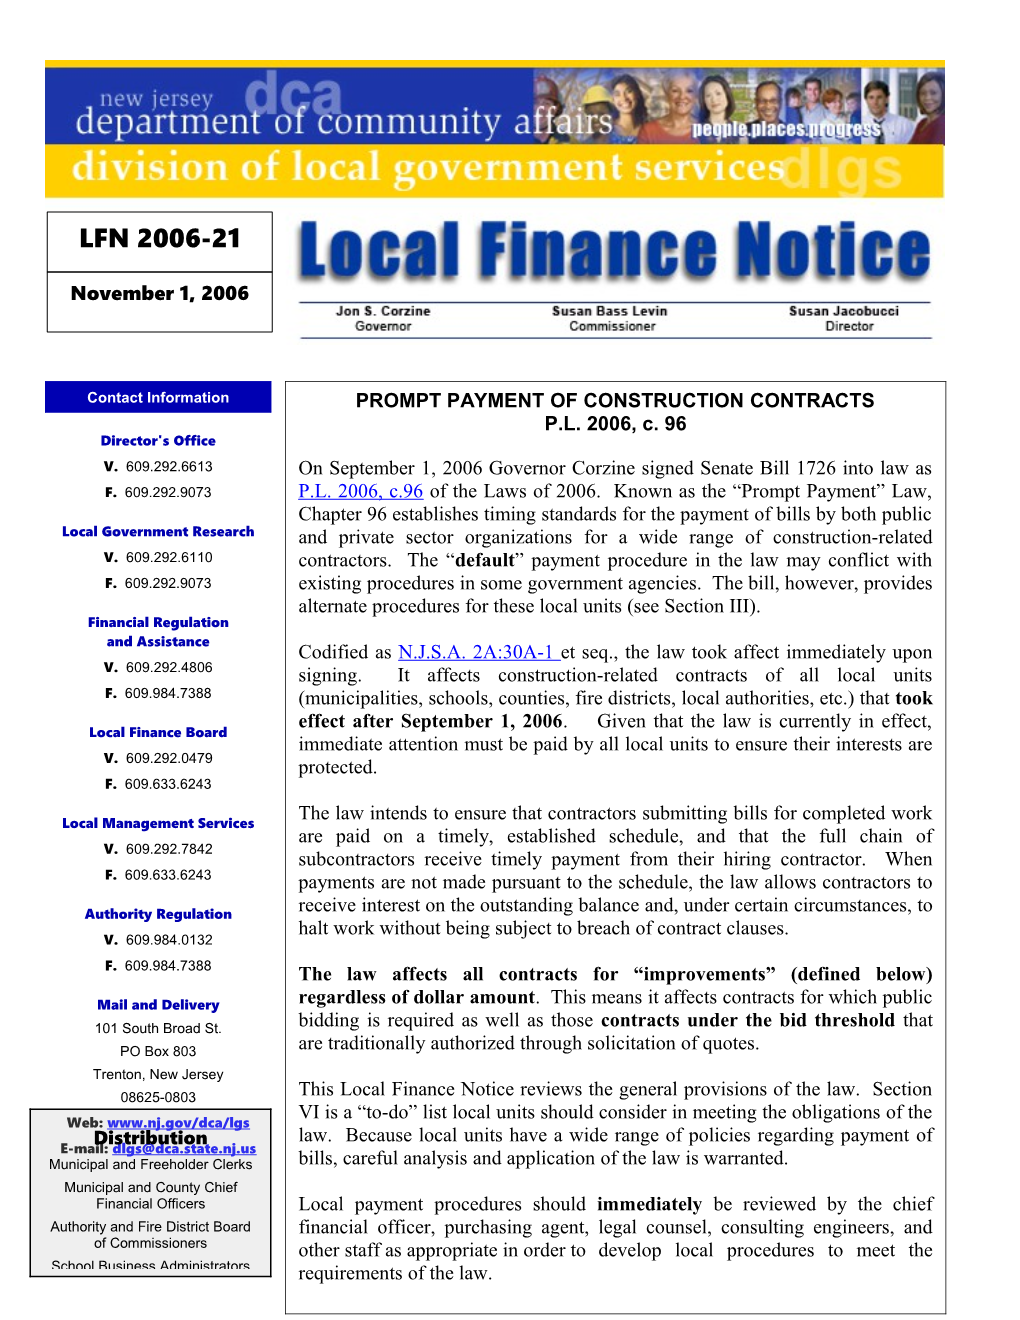 Local Finance Notice 2006-21November 1, 2006Page 1